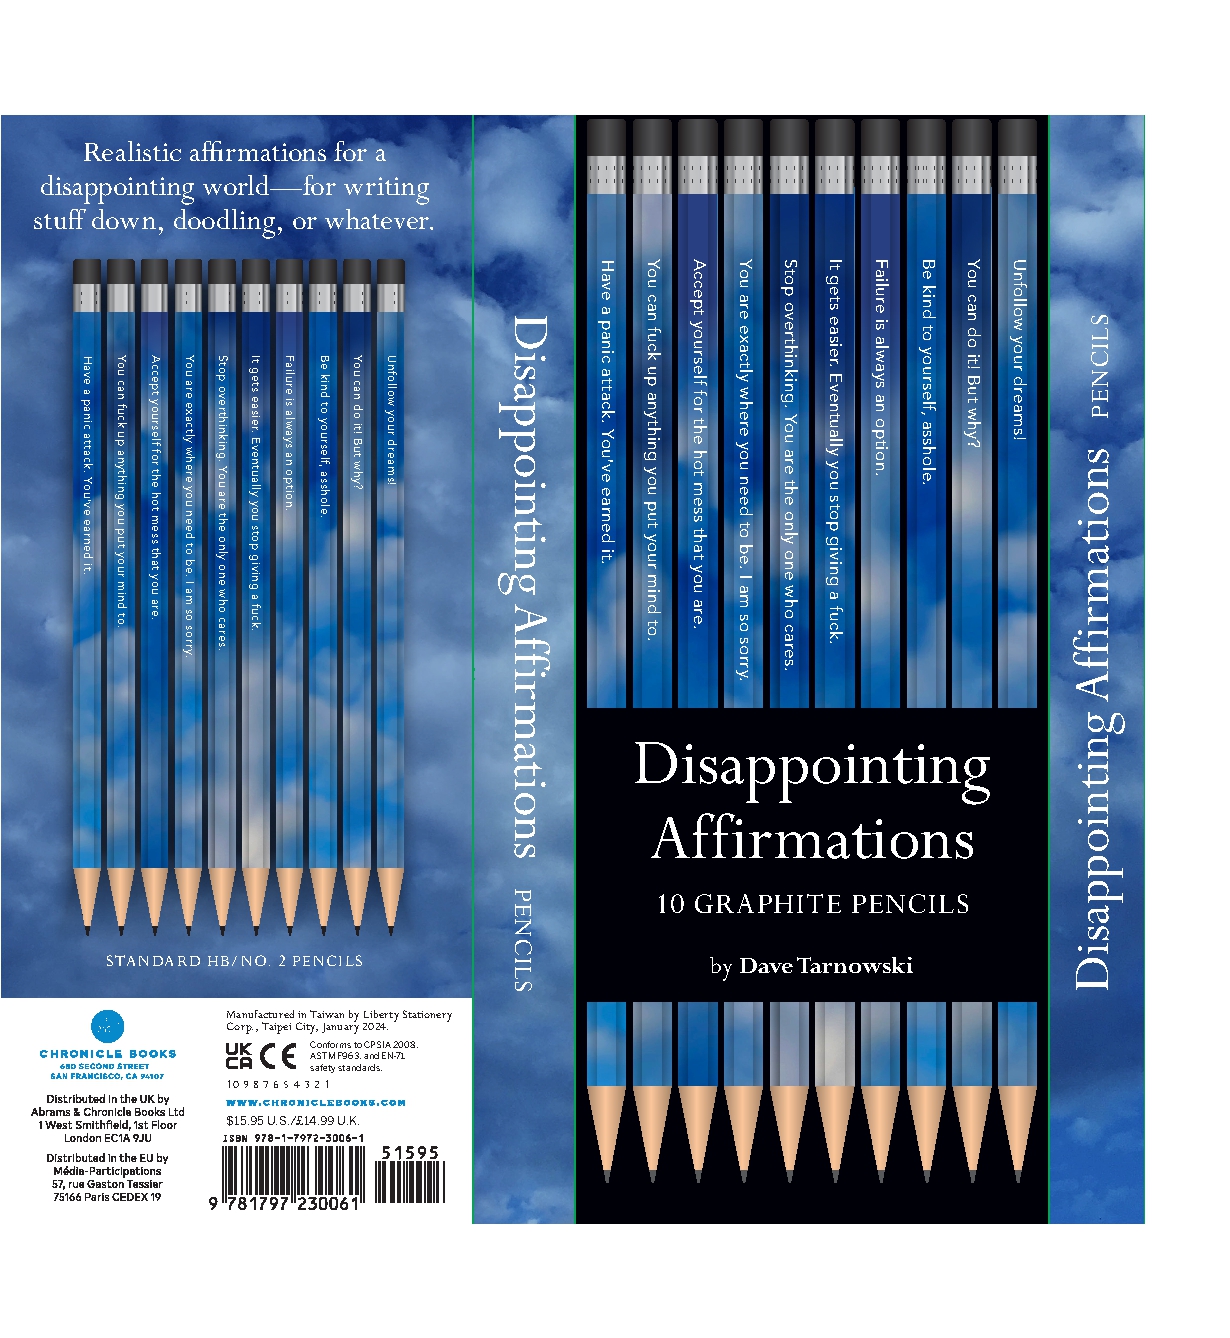 Disappointing Affirmations Pencils